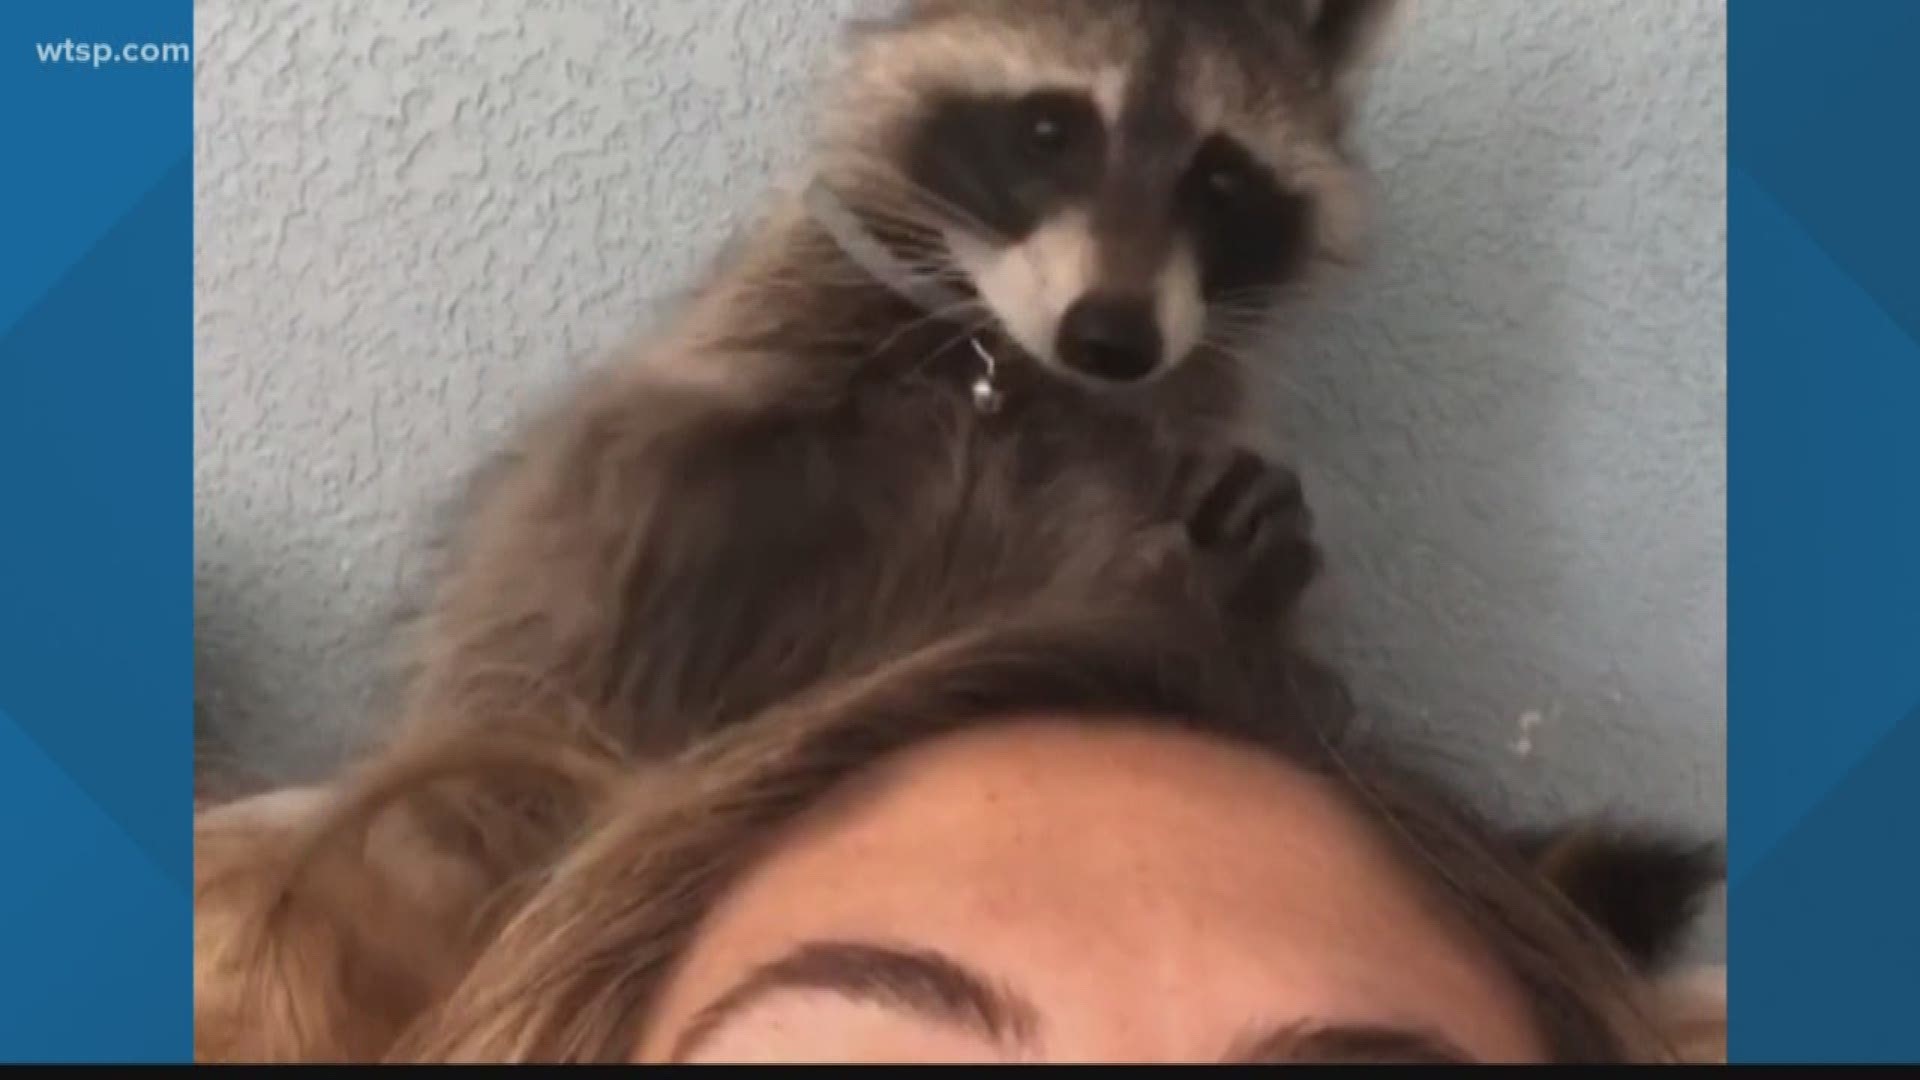 As cute and cuddly as they might seem, wild animals aren't meant to be kept indoors -- but don't tell that to this Florida family. Oscar the raccoon was abandoned by his mother and taken in as a pet. A permit was approved, but later they were told it was not valid because the raccoon didn't come from a breeder.